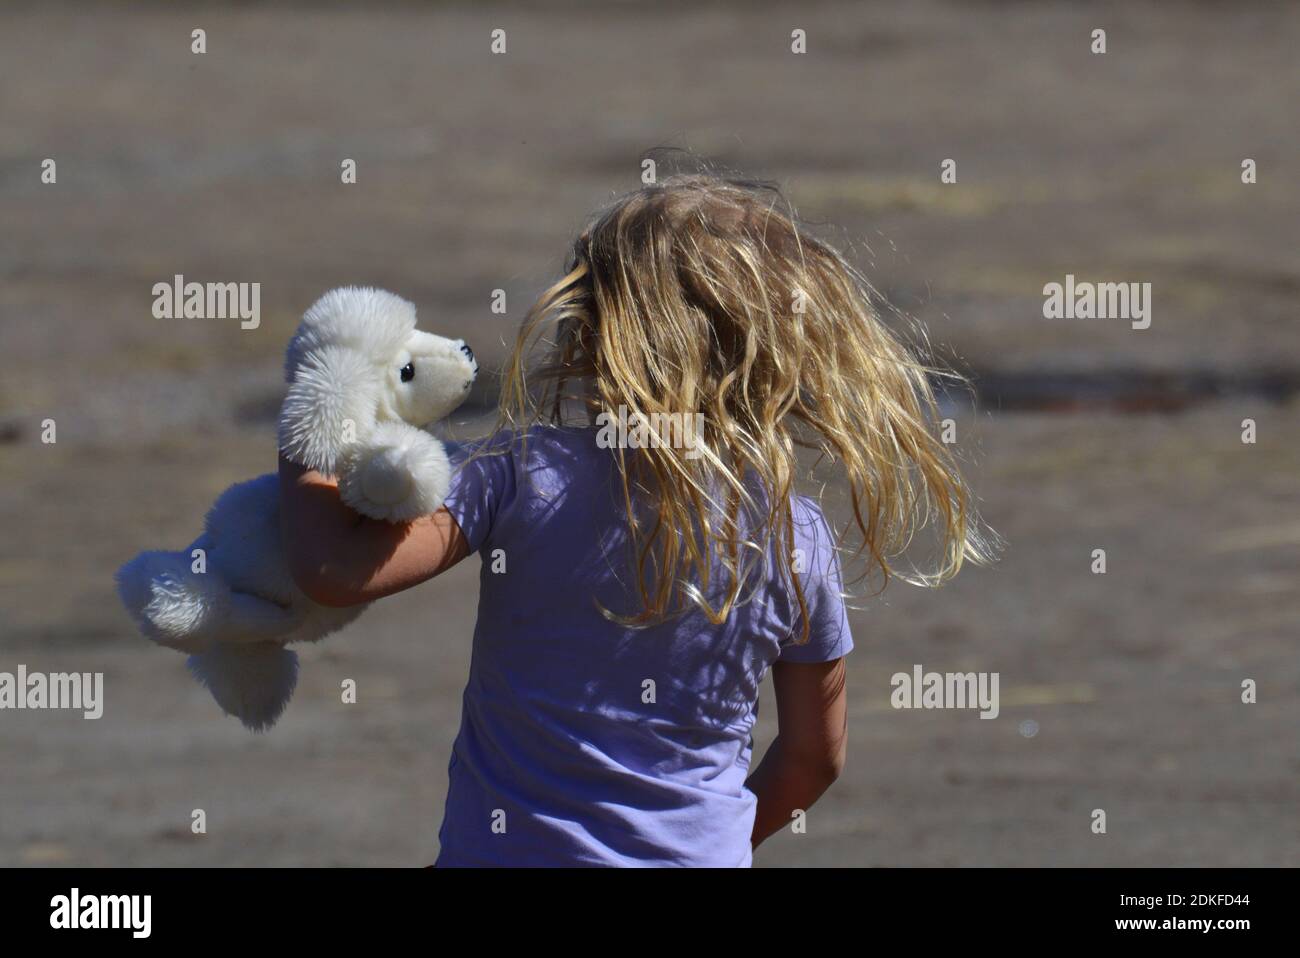 Rear View Of Girl With Toy Walking On Footpath Stock Photo